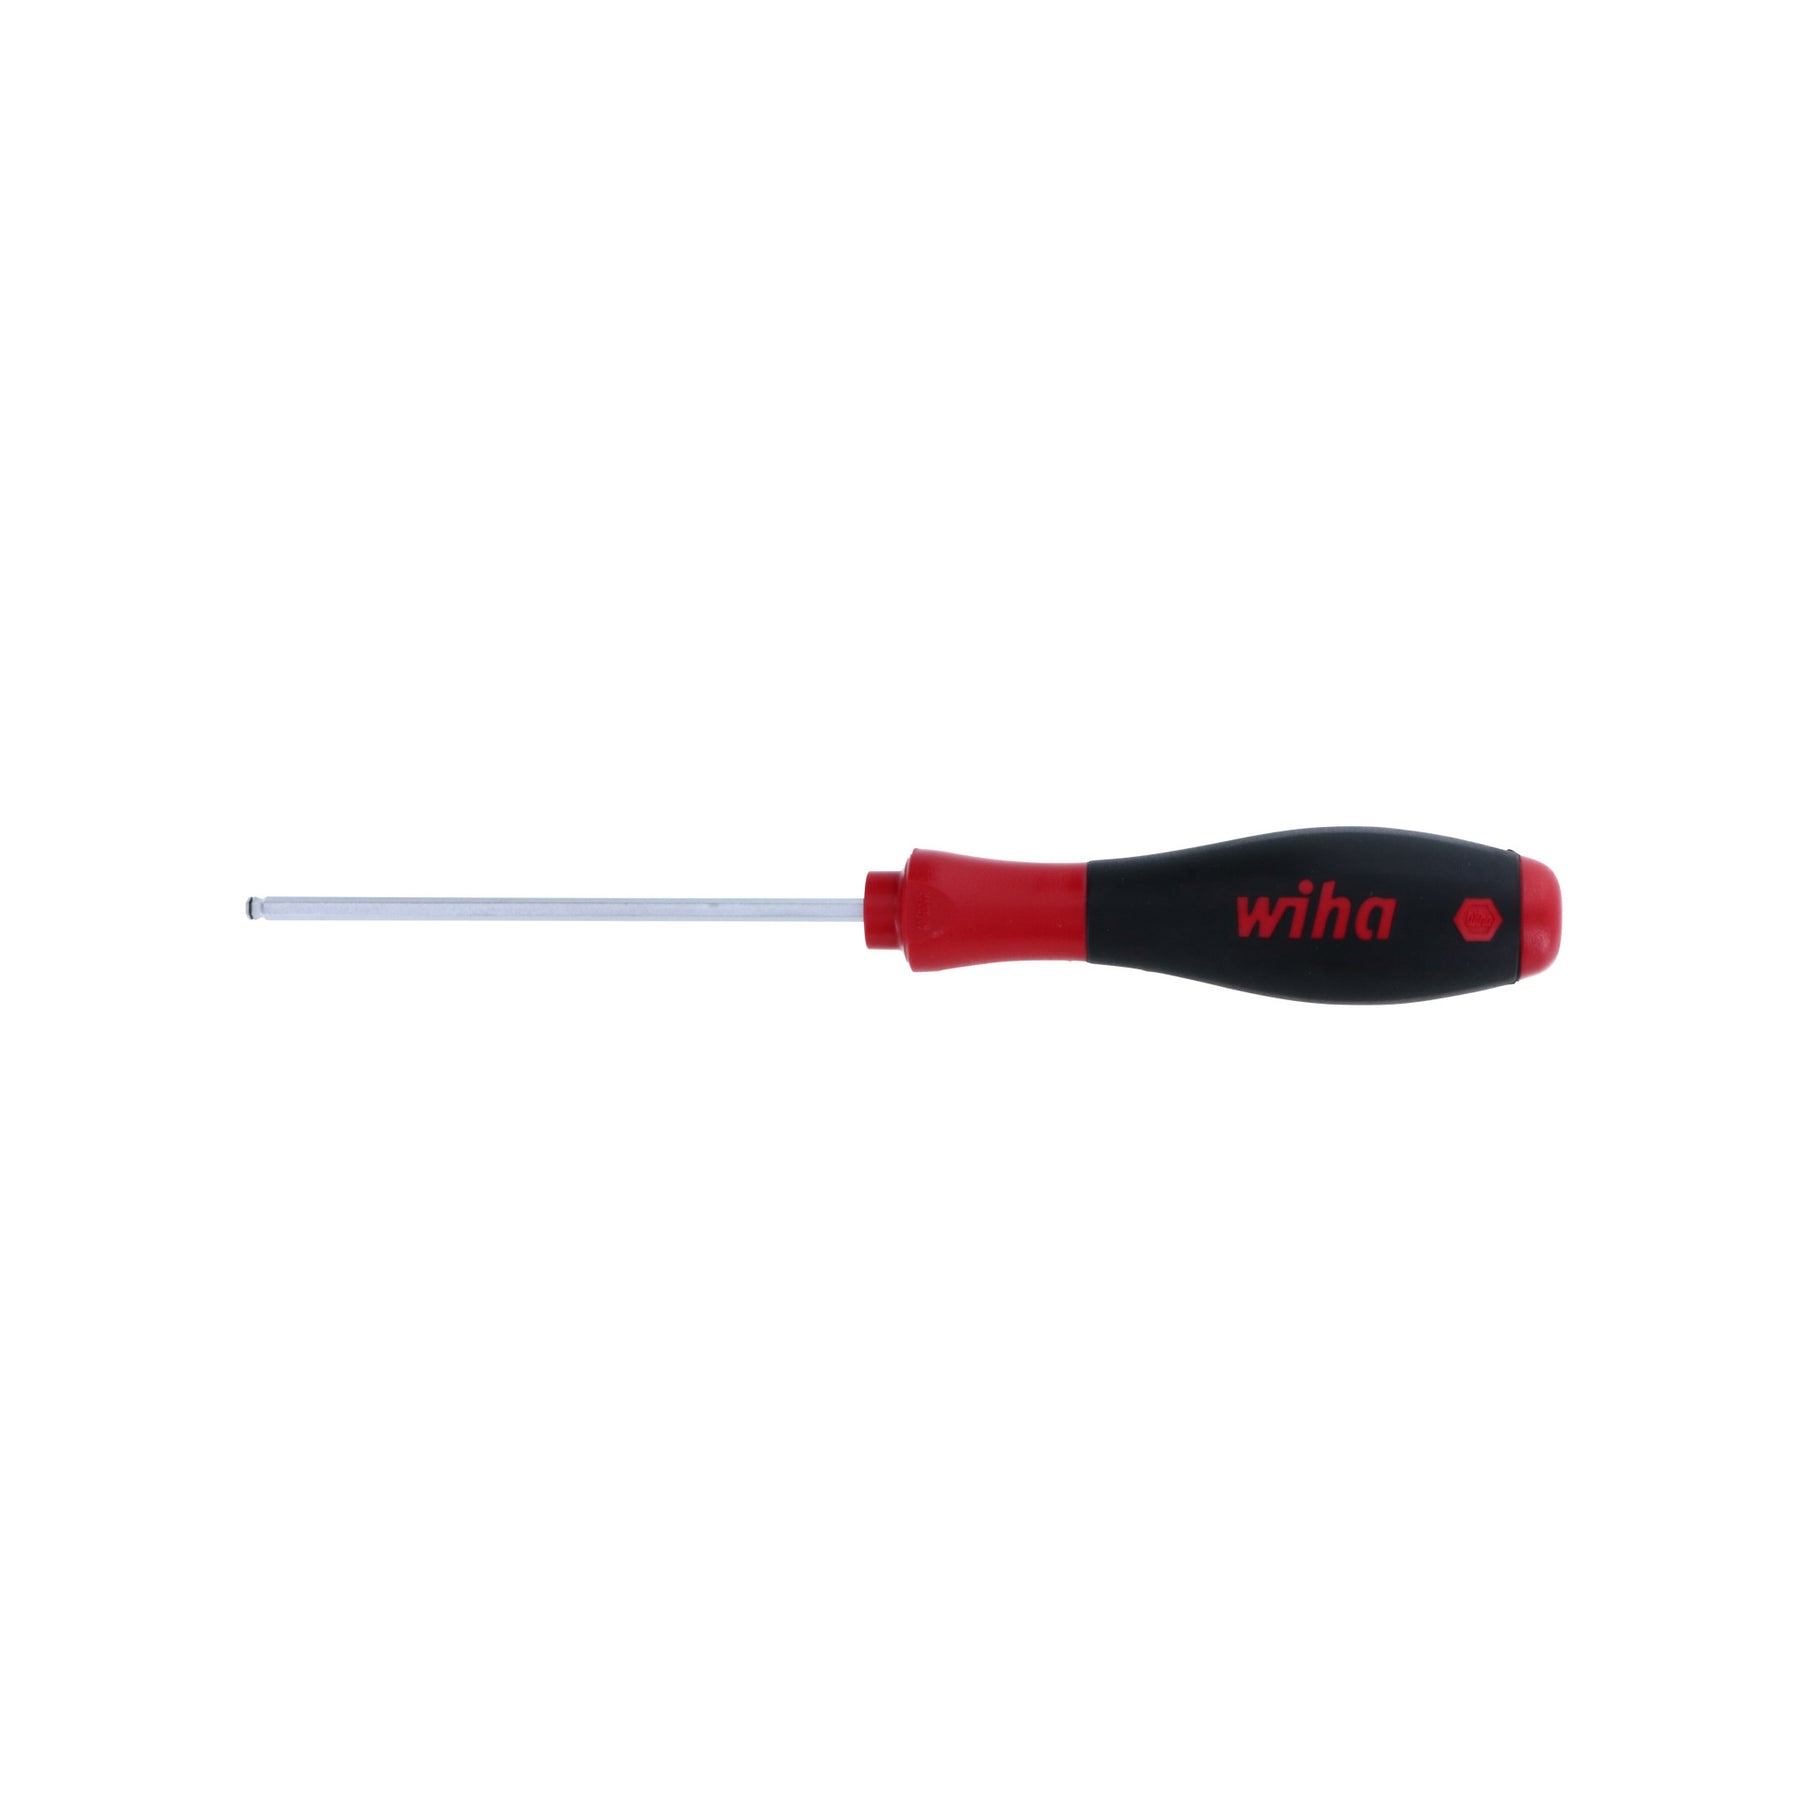 SoftFinish MagicRing Ball End Screwdriver 9/64"